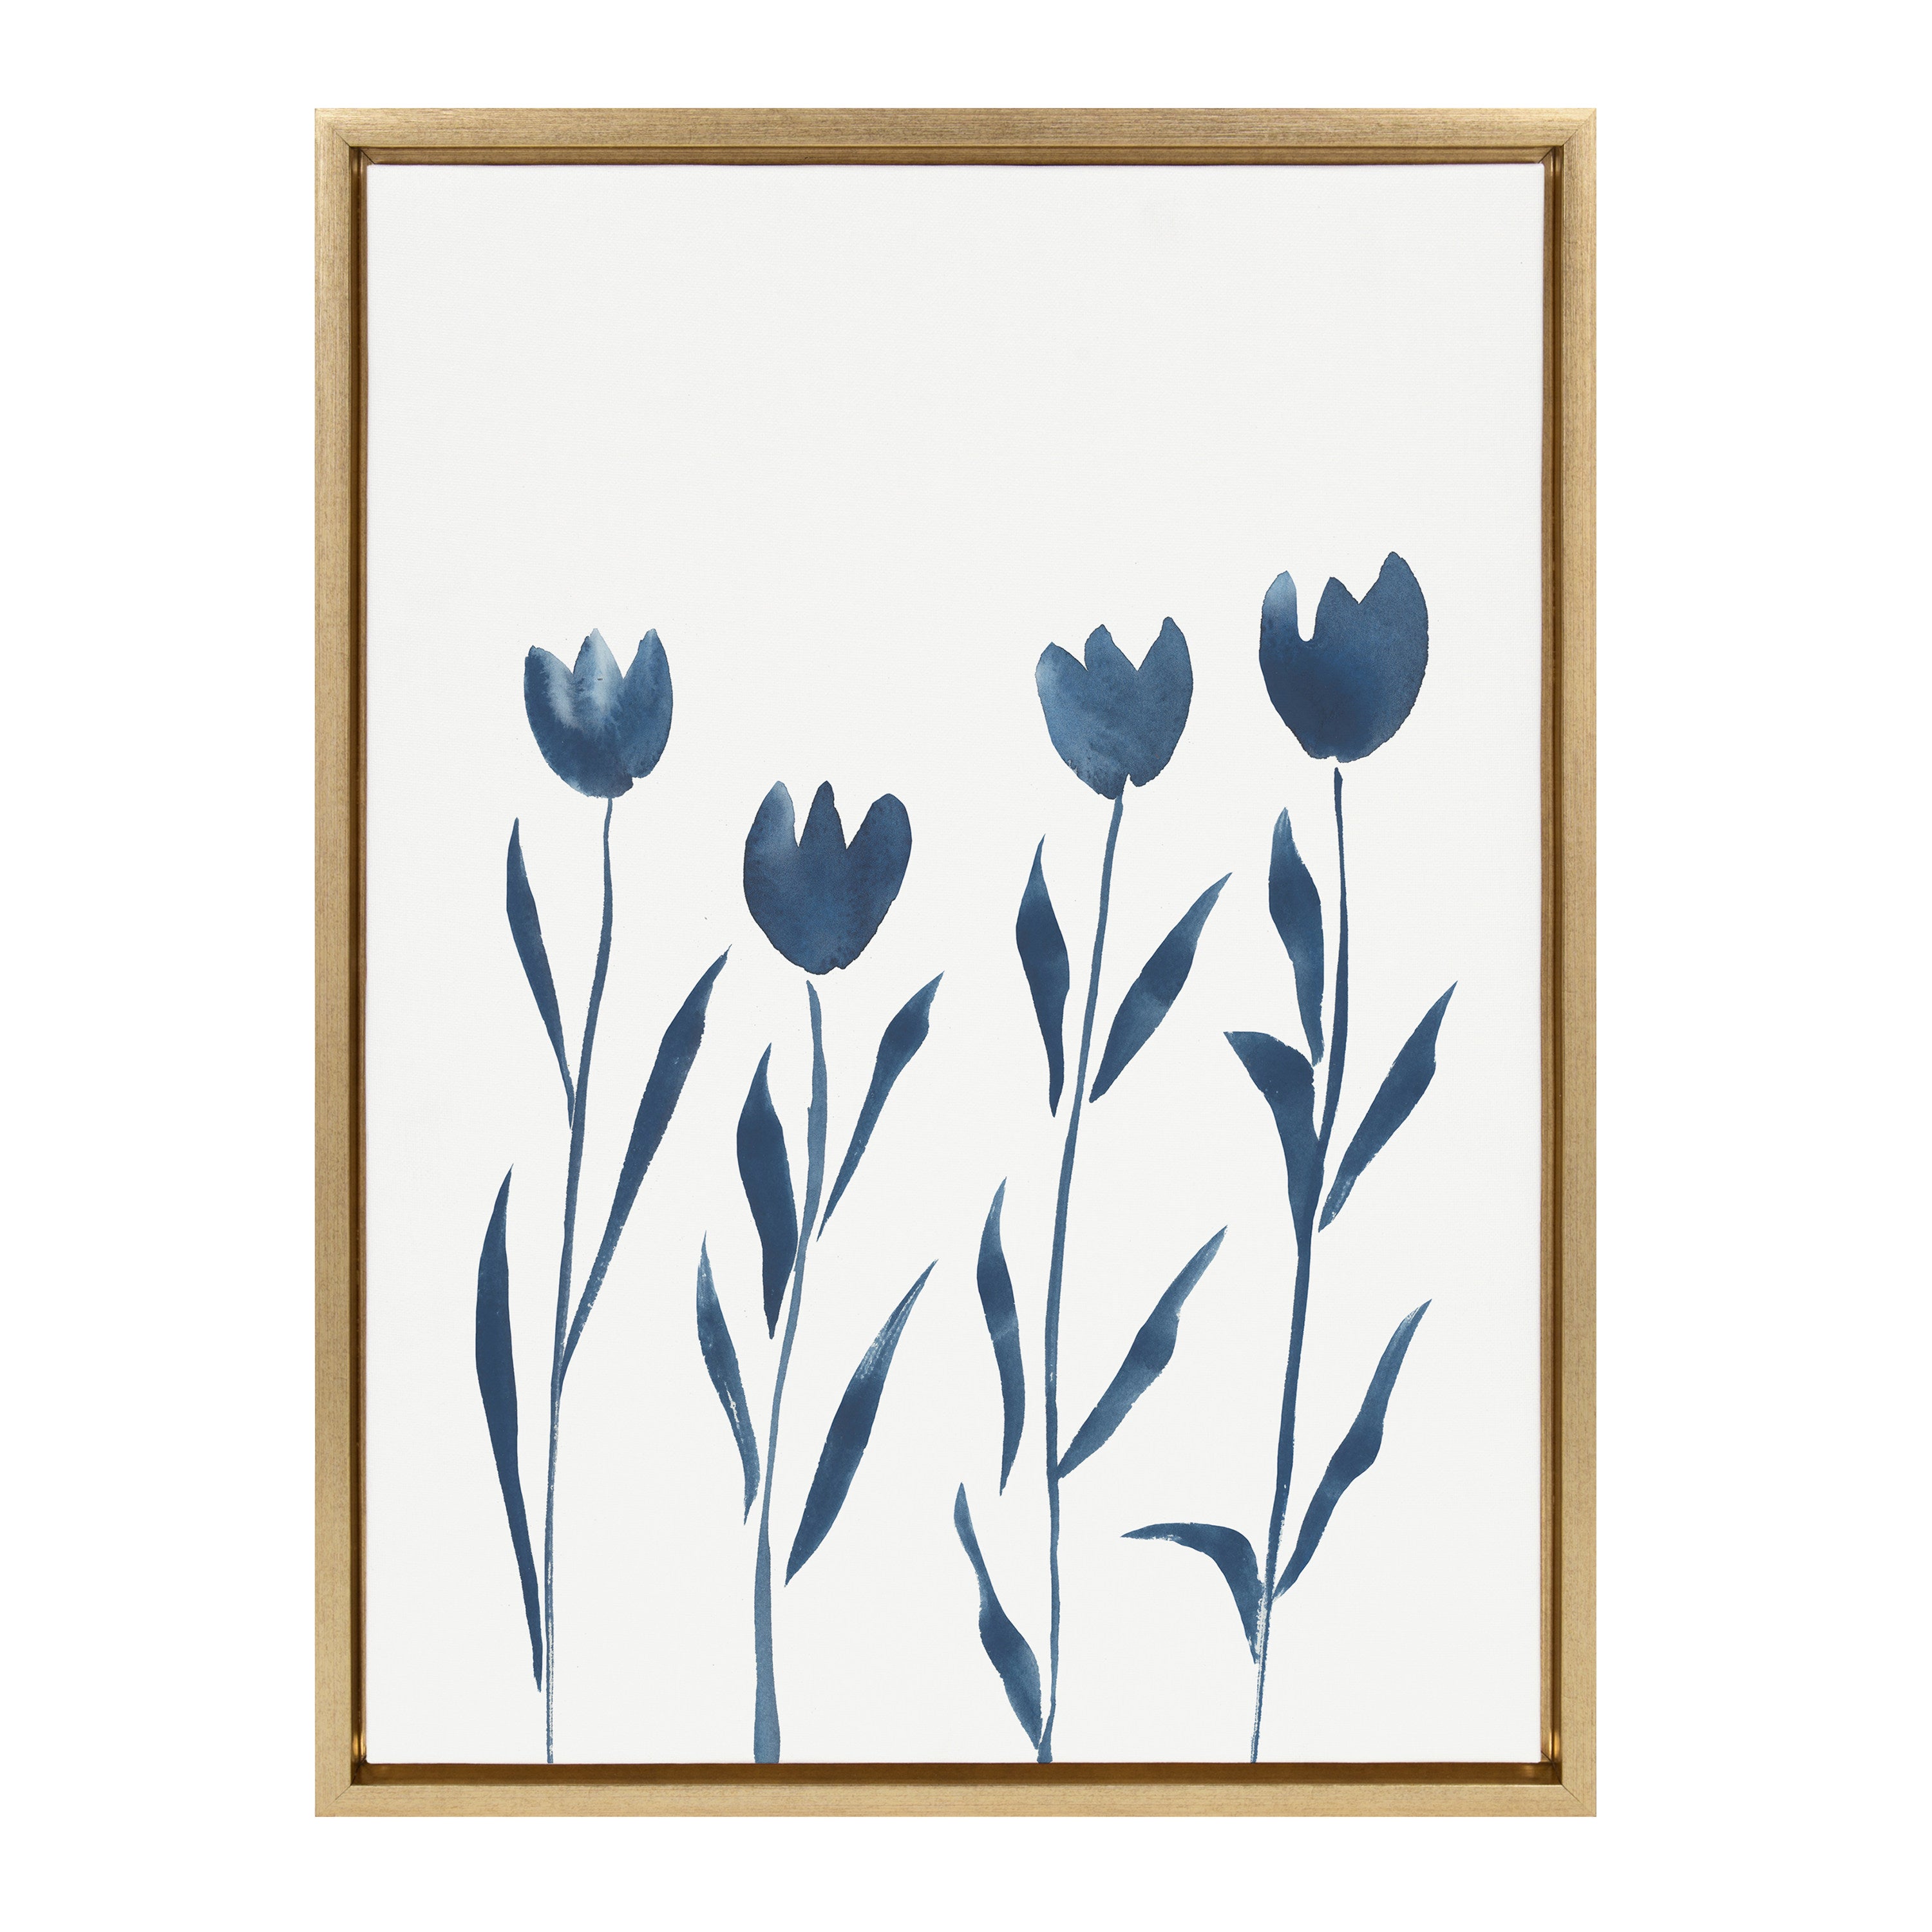 Sylvie Indigo Tulips on White Framed Canvas by Teju Reval of SnazzyHues